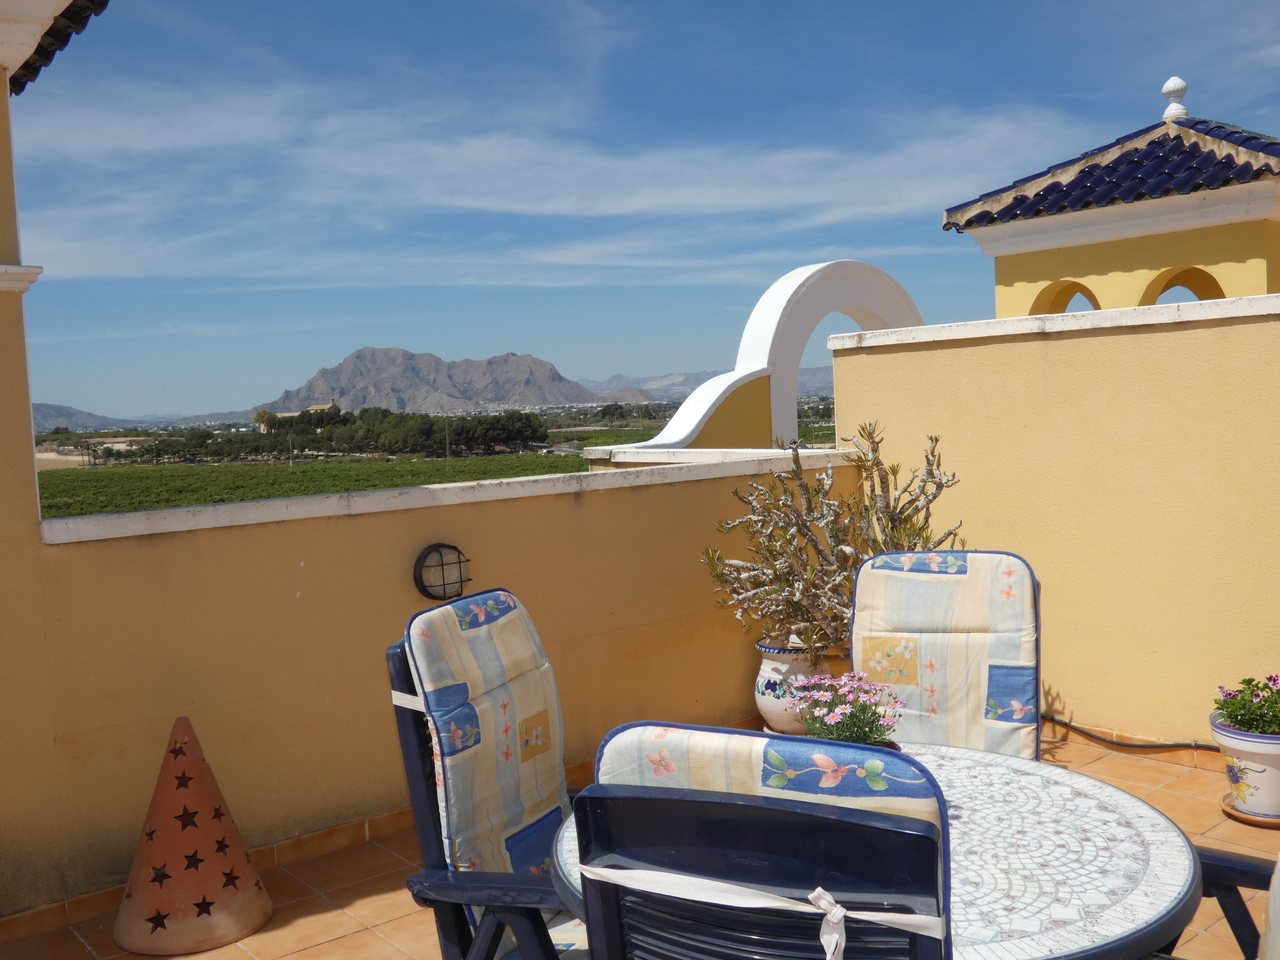 For Sale: Apartment in Algorfa Beds: 2 Baths: 1 Price: 99,995€